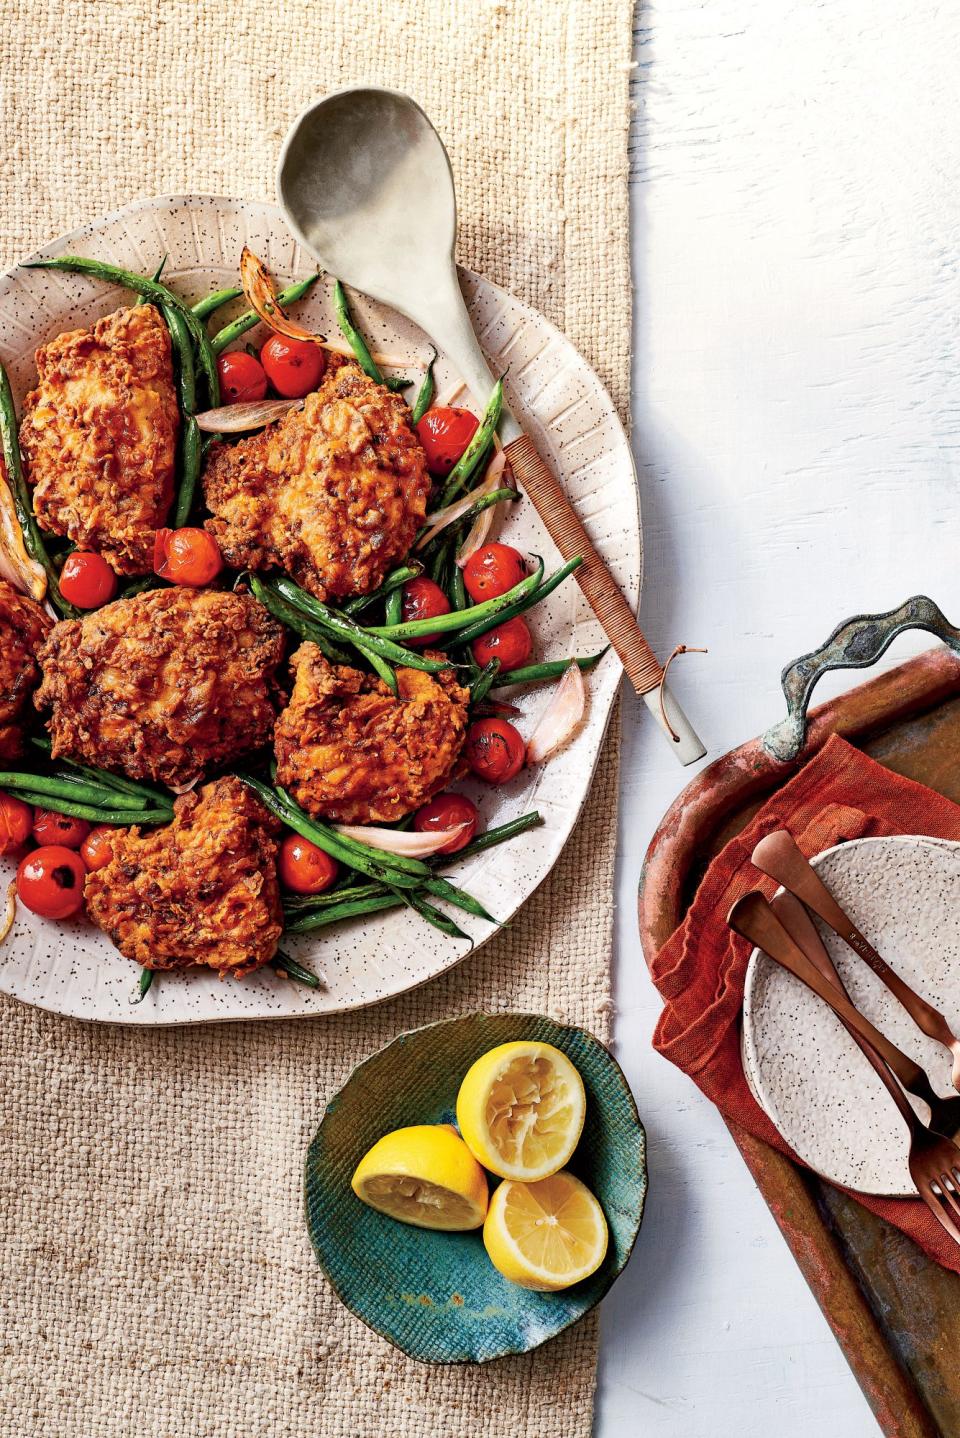 Lighter Pan-Fried Chicken with Green Beans and Tomatoes